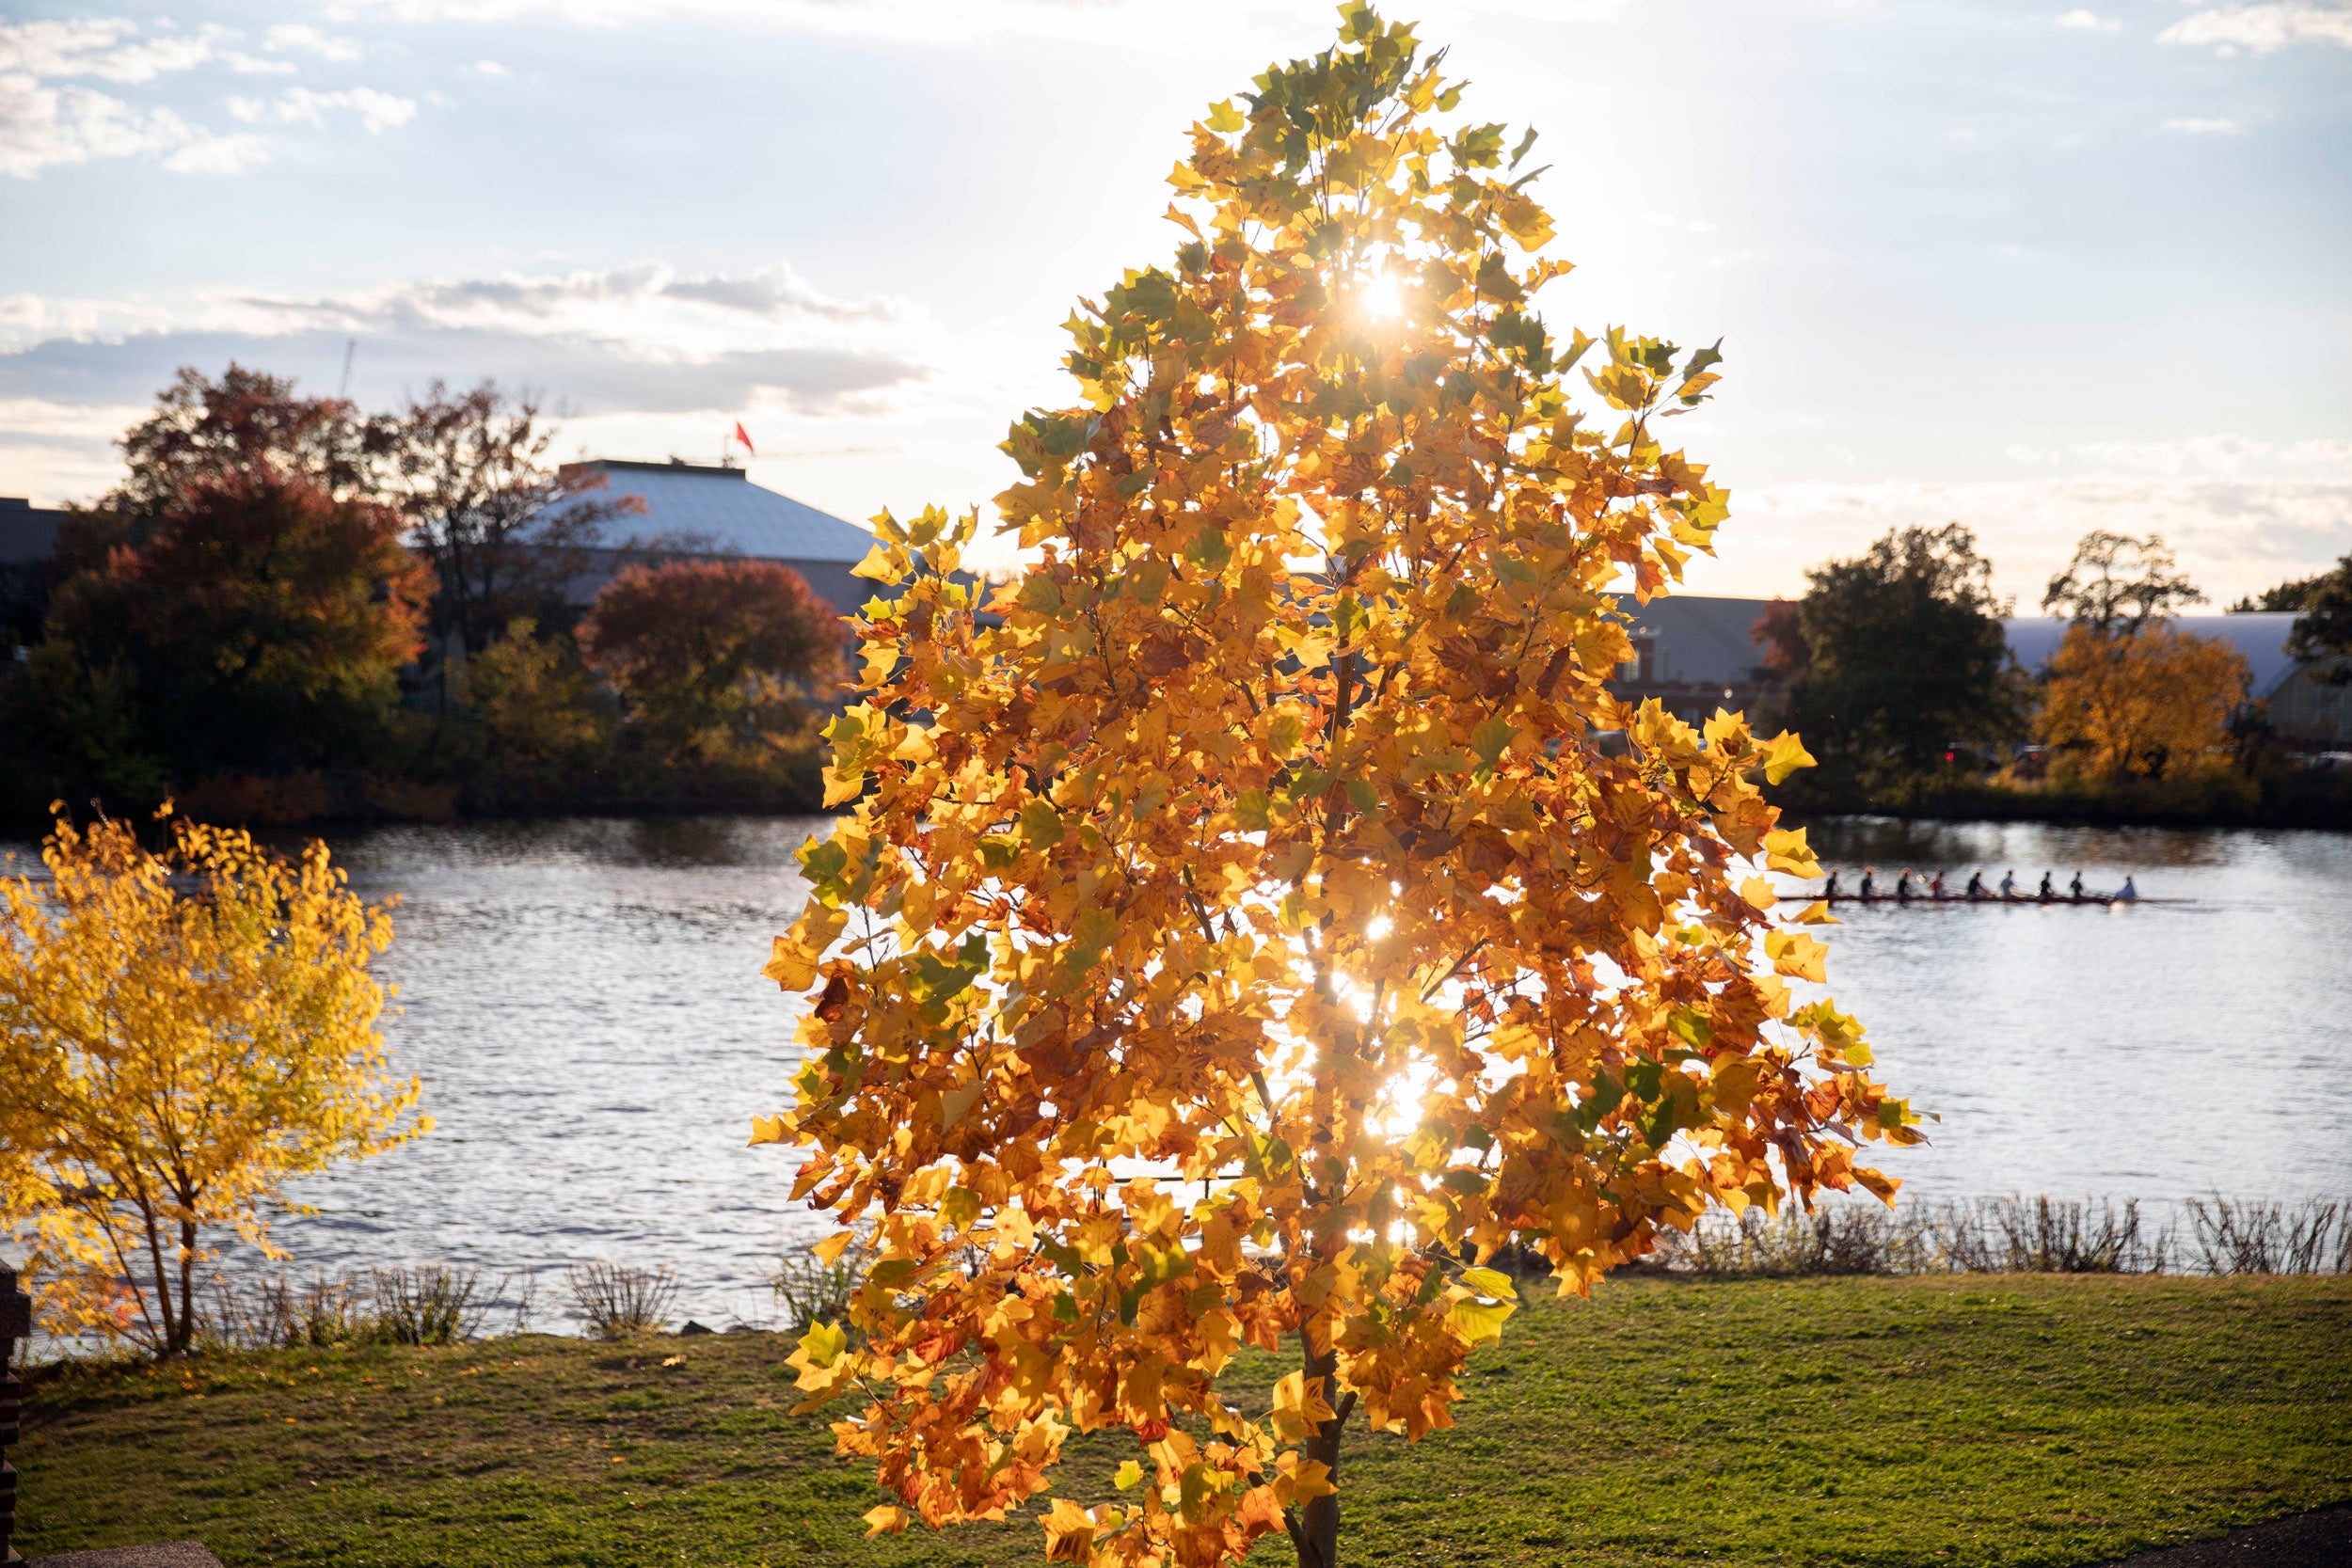 Bright orange foliage is pictured by the Charles River.